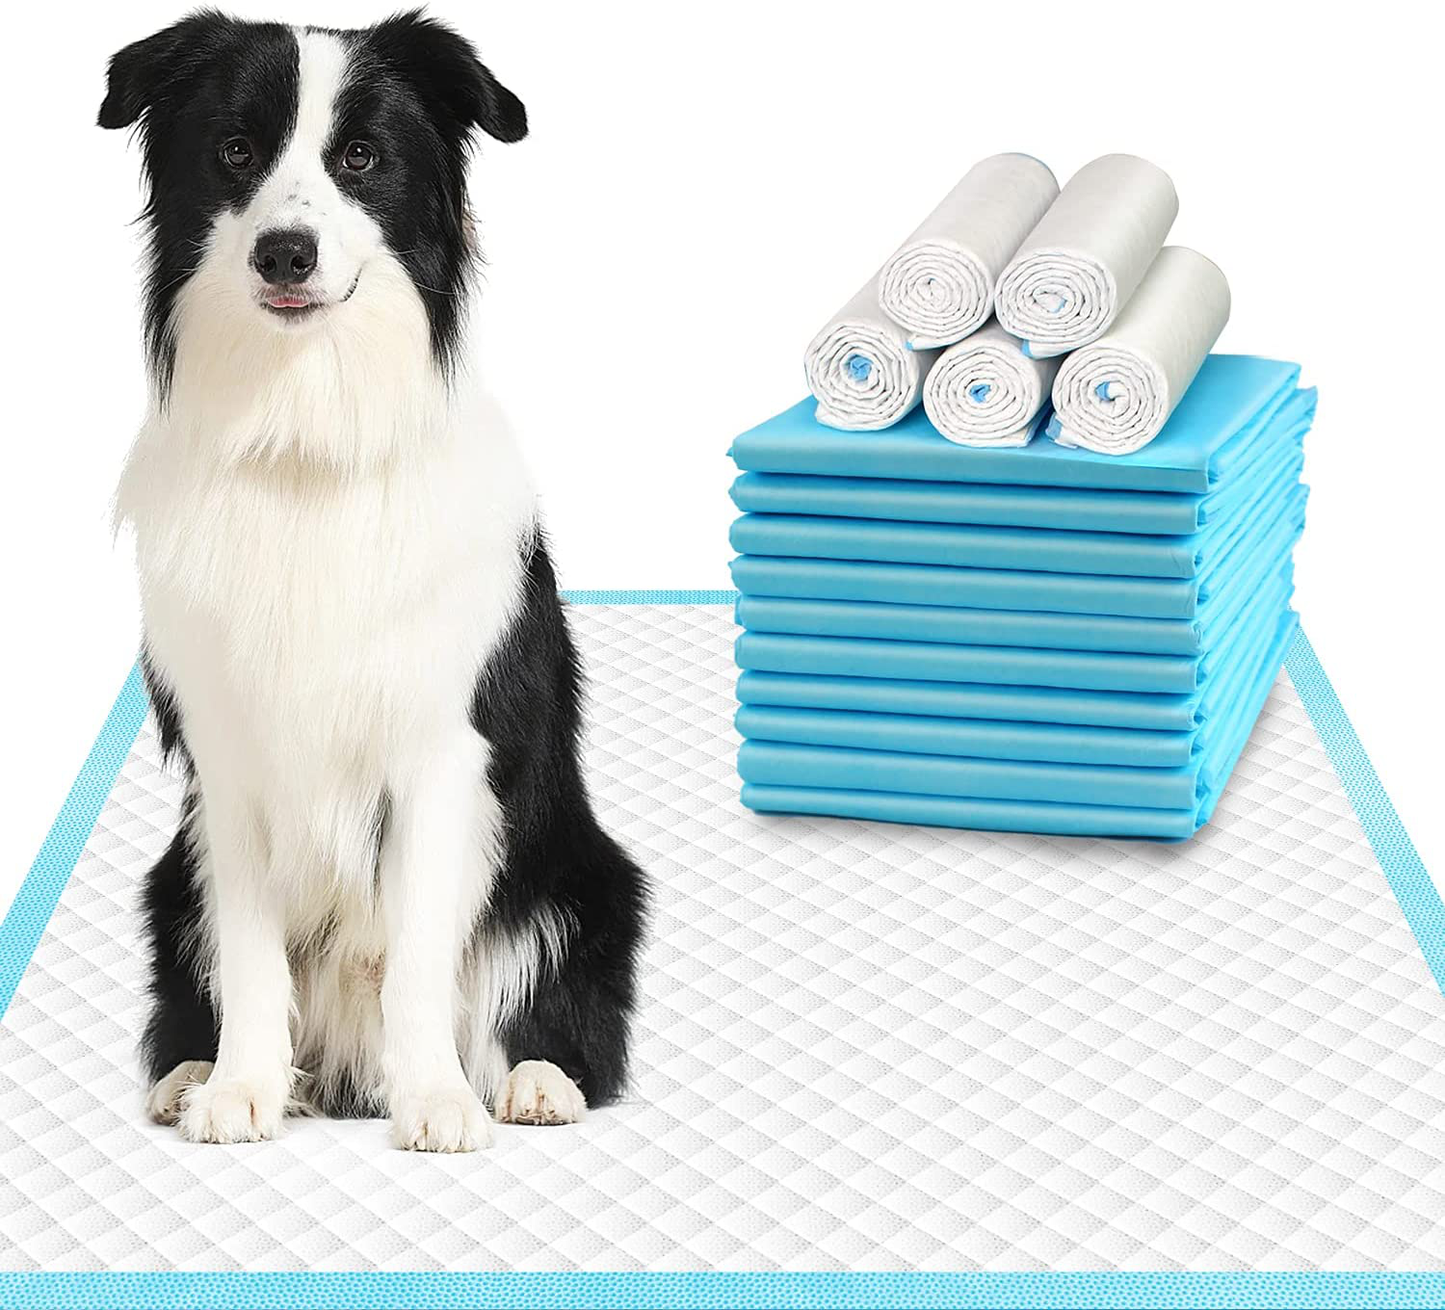 Deep Dear Extra Large Dog Pee Pads, Thicker Puppy Pads, Super Absorbent Pee Pads for Dogs, Disposable Dog Training Pads for Doggies, Cats, Rabbits, Leak-Proof Pet Pads for Housetraining Animals & Pet Supplies > Pet Supplies > Dog Supplies > Dog Diaper Pads & Liners Deep Dear XLarge: 28"x34" - 30 Count  